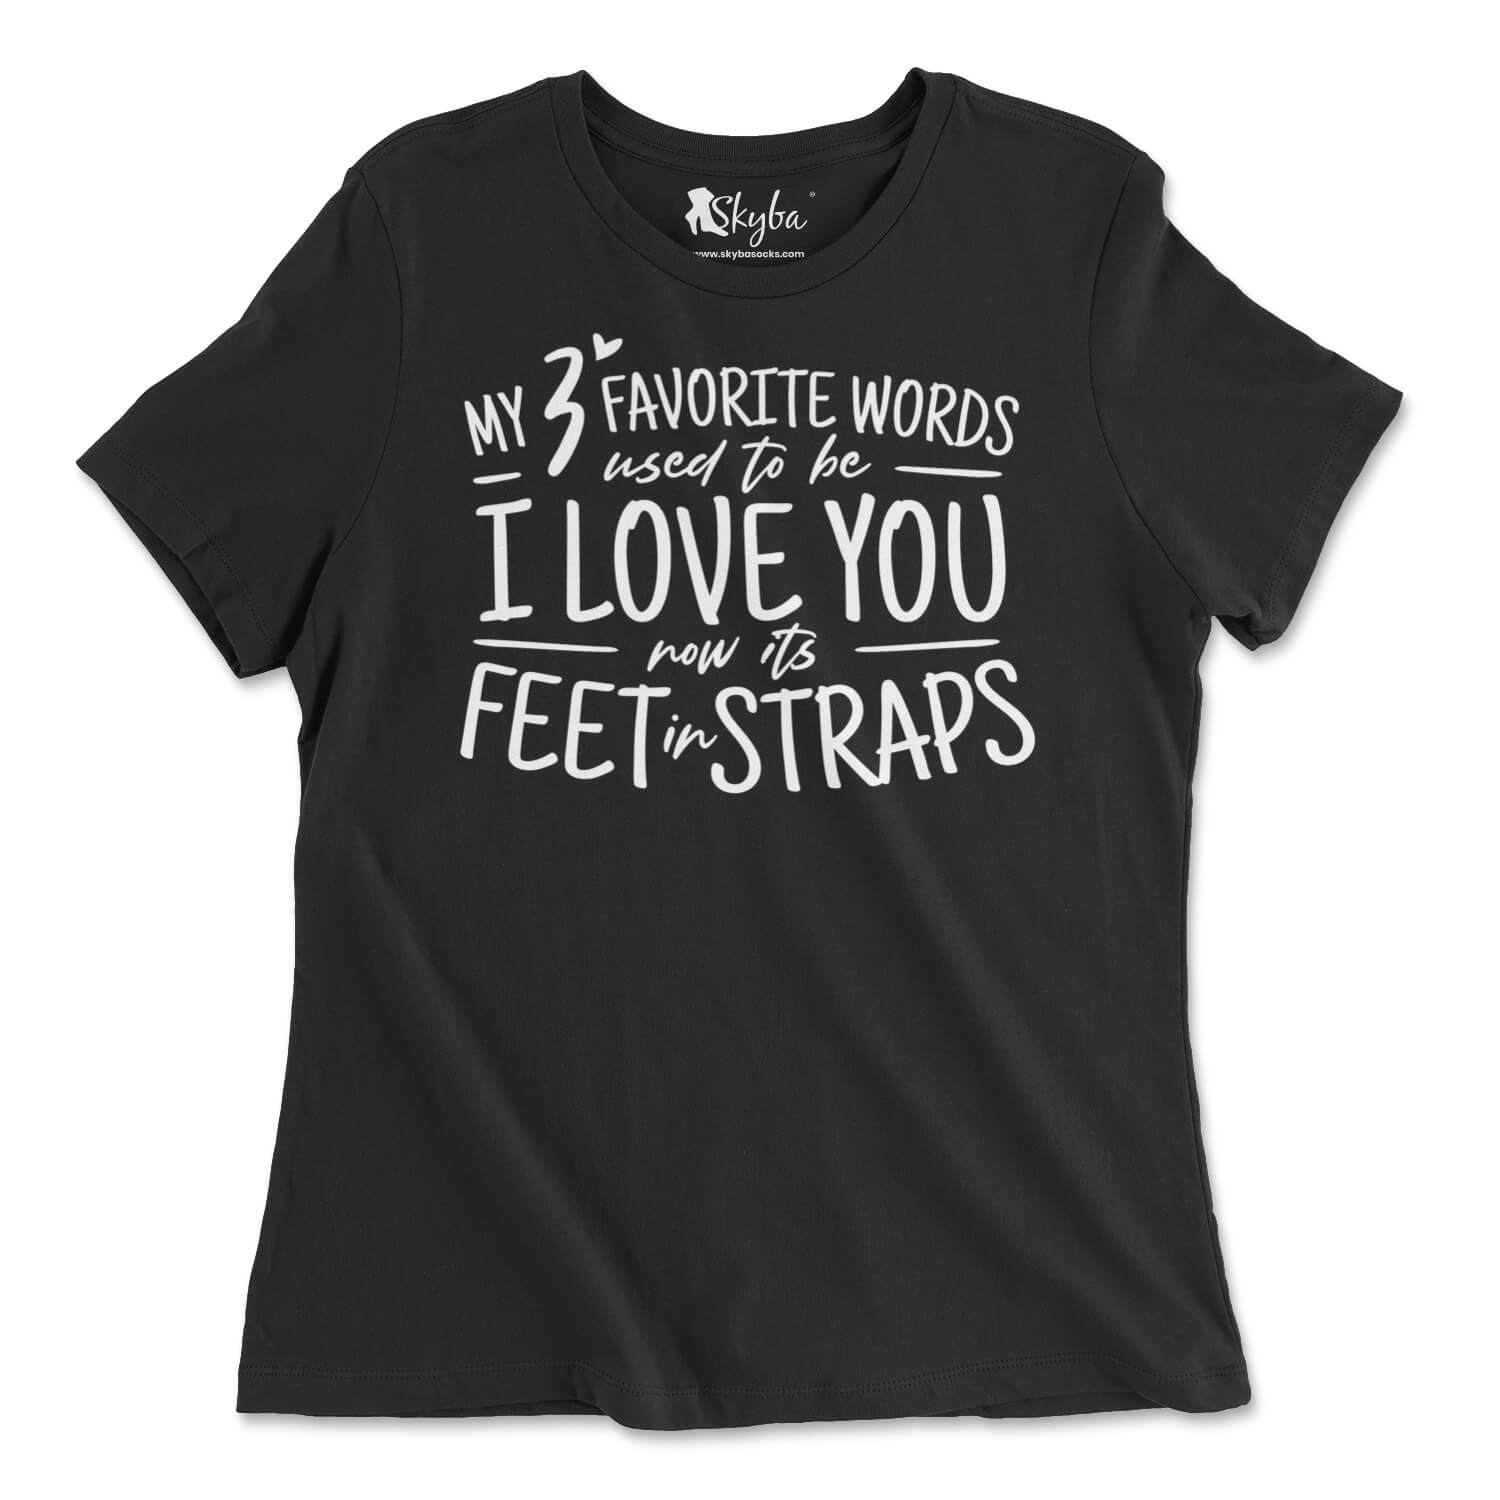 My 3 Favorite Words Used To Be I Love You Now It's Feet in Straps - Classic Tee Skyba T-Shirt